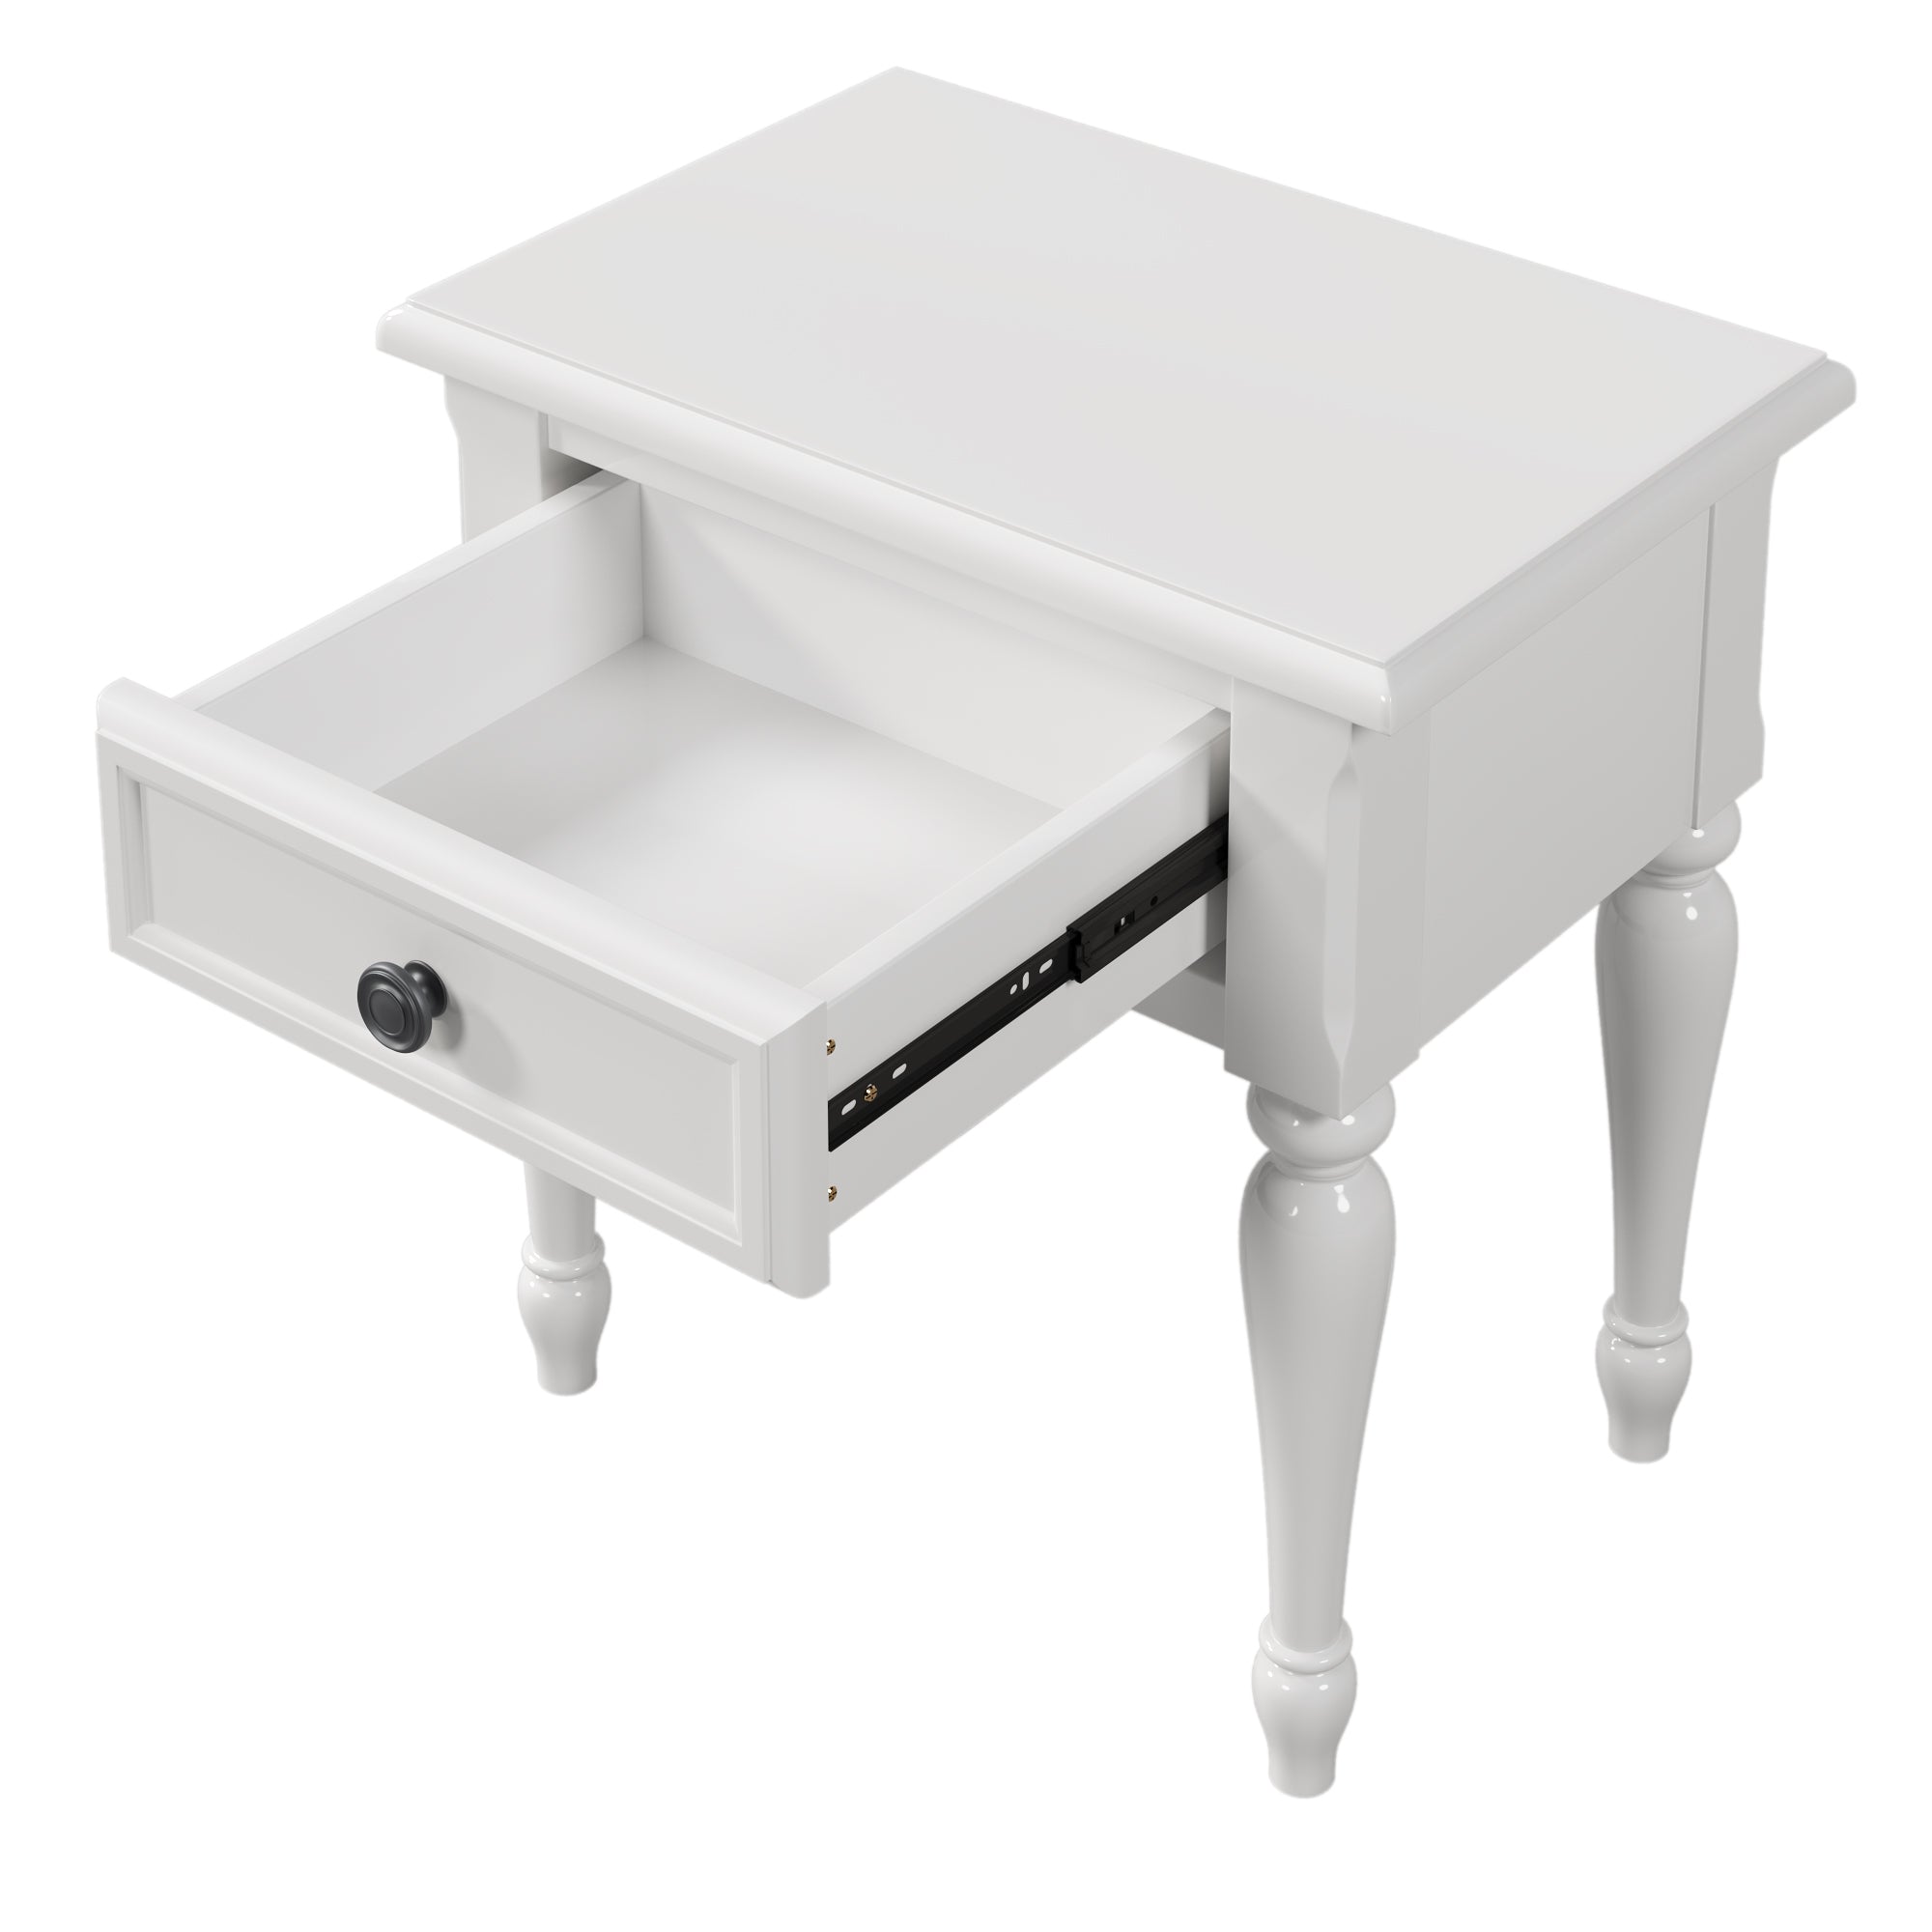 Solid Wood traditional One Drawer Side Table End Table white-solid wood+mdf